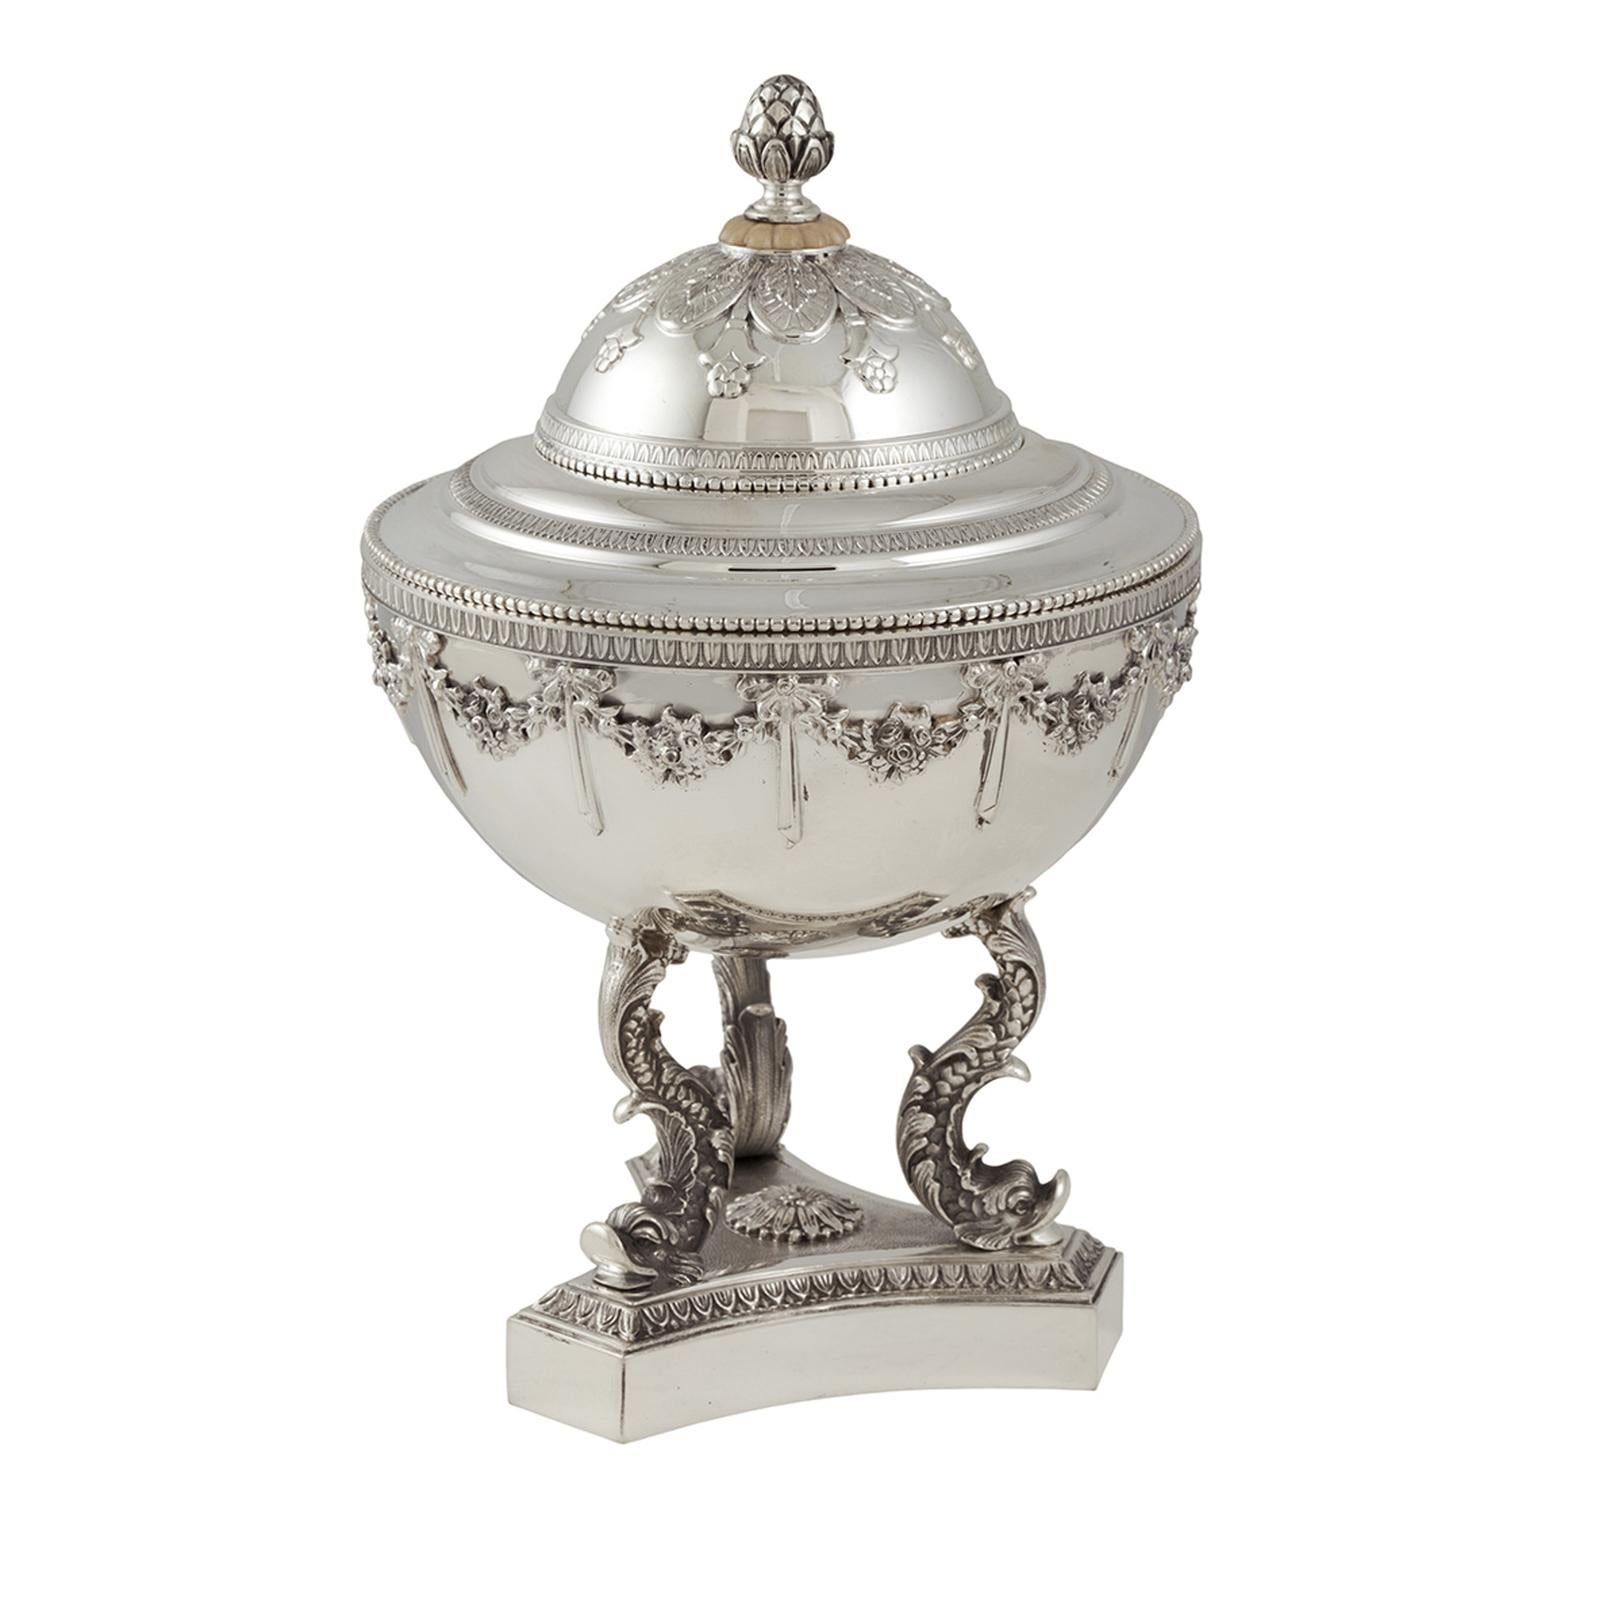 This magnificent bowl with lid and base is entirely made in silver and was specifically designed to store and serve caviar. Its Classic shape is adorned with Renaissance-inspired decorations, including three dolphins that connect the triangular base